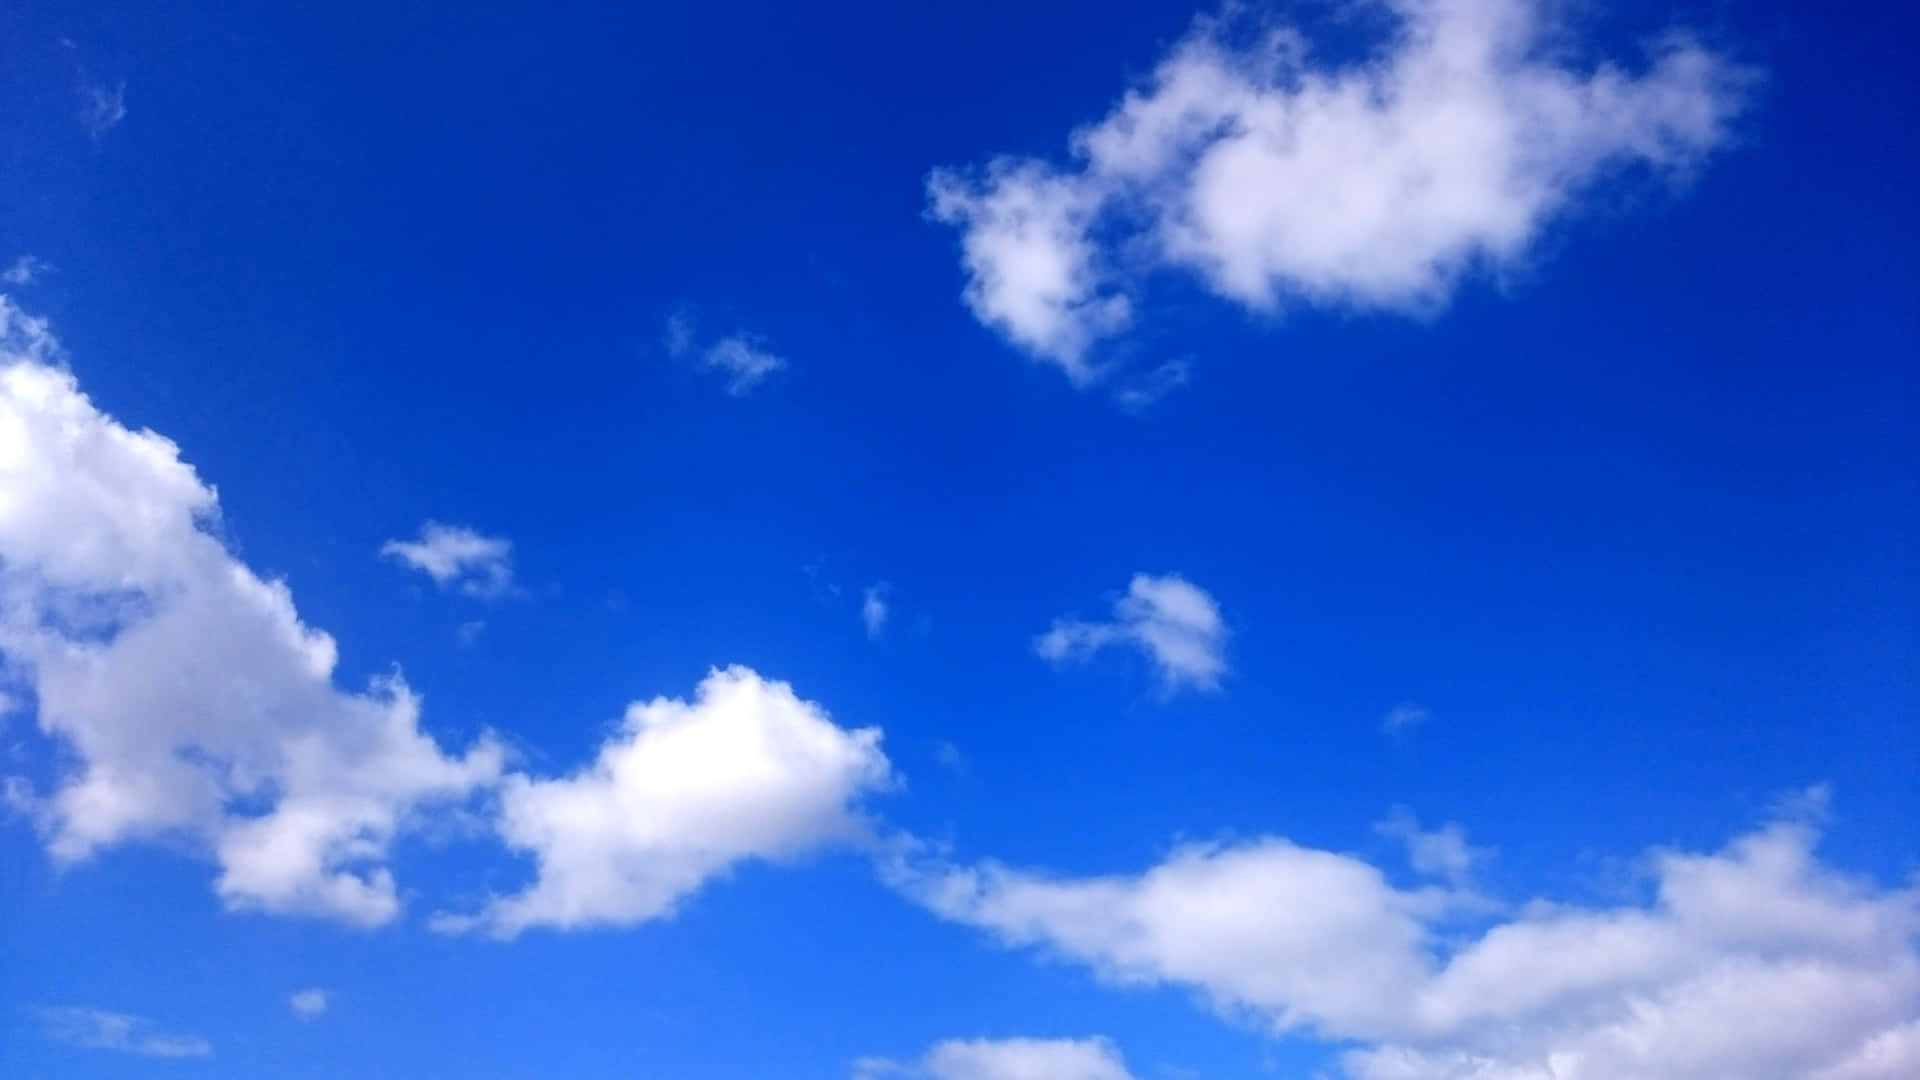 Download A Blue Sky With White Clouds And Blue Sky | Wallpapers.com